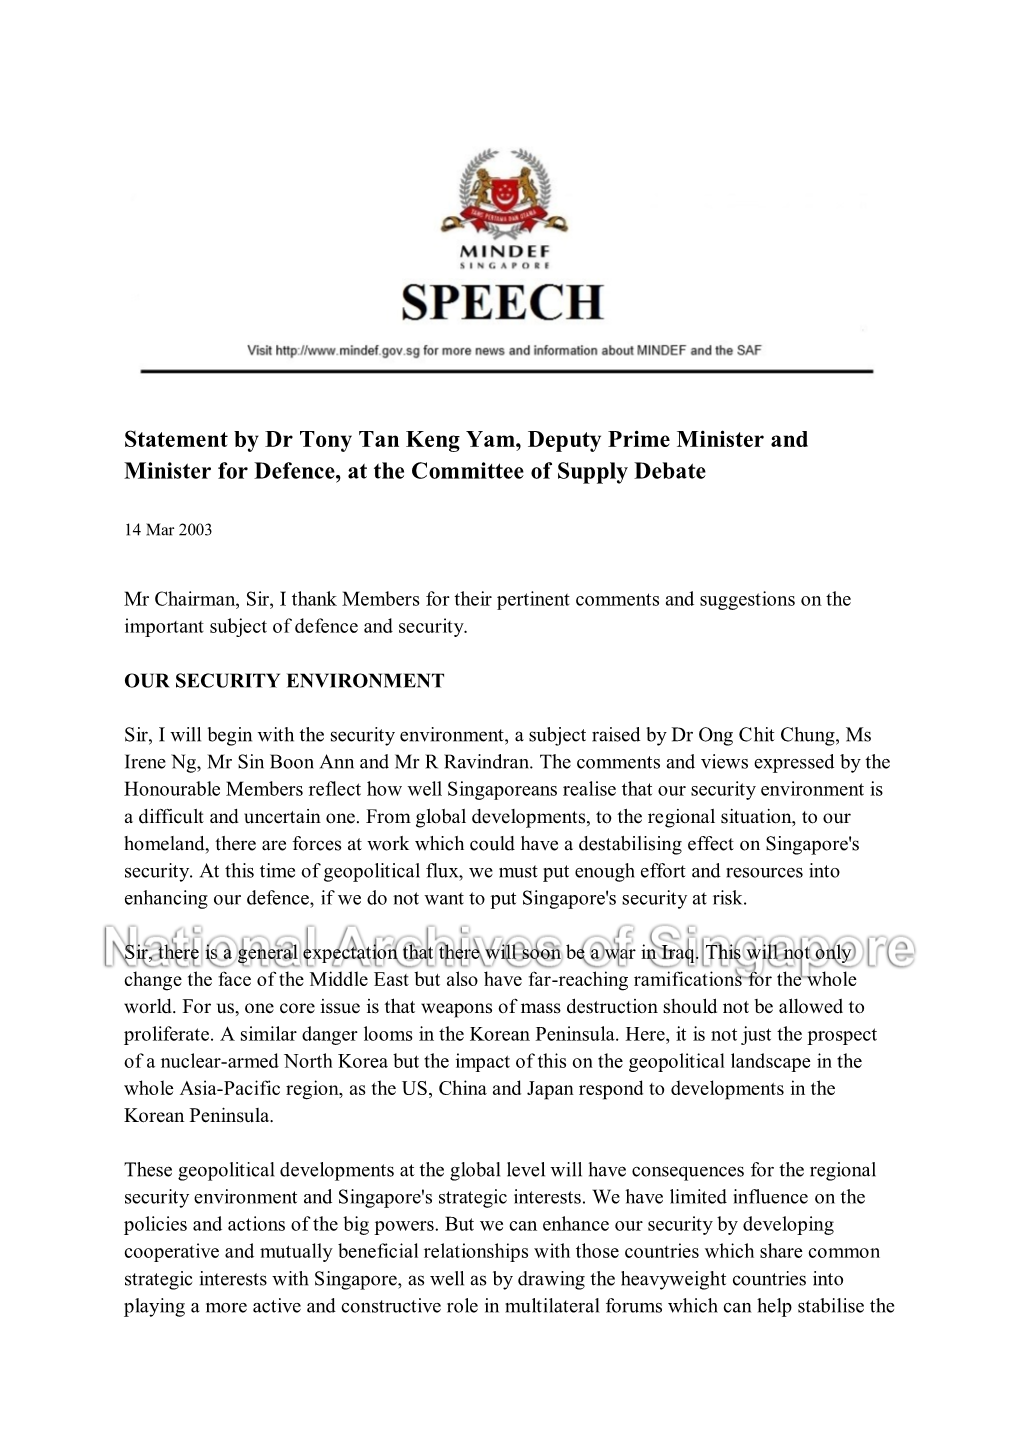 Statement by Dr Tony Tan Keng Yam, Deputy Prime Minister and Minister for Defence, at the Committee of Supply Debate